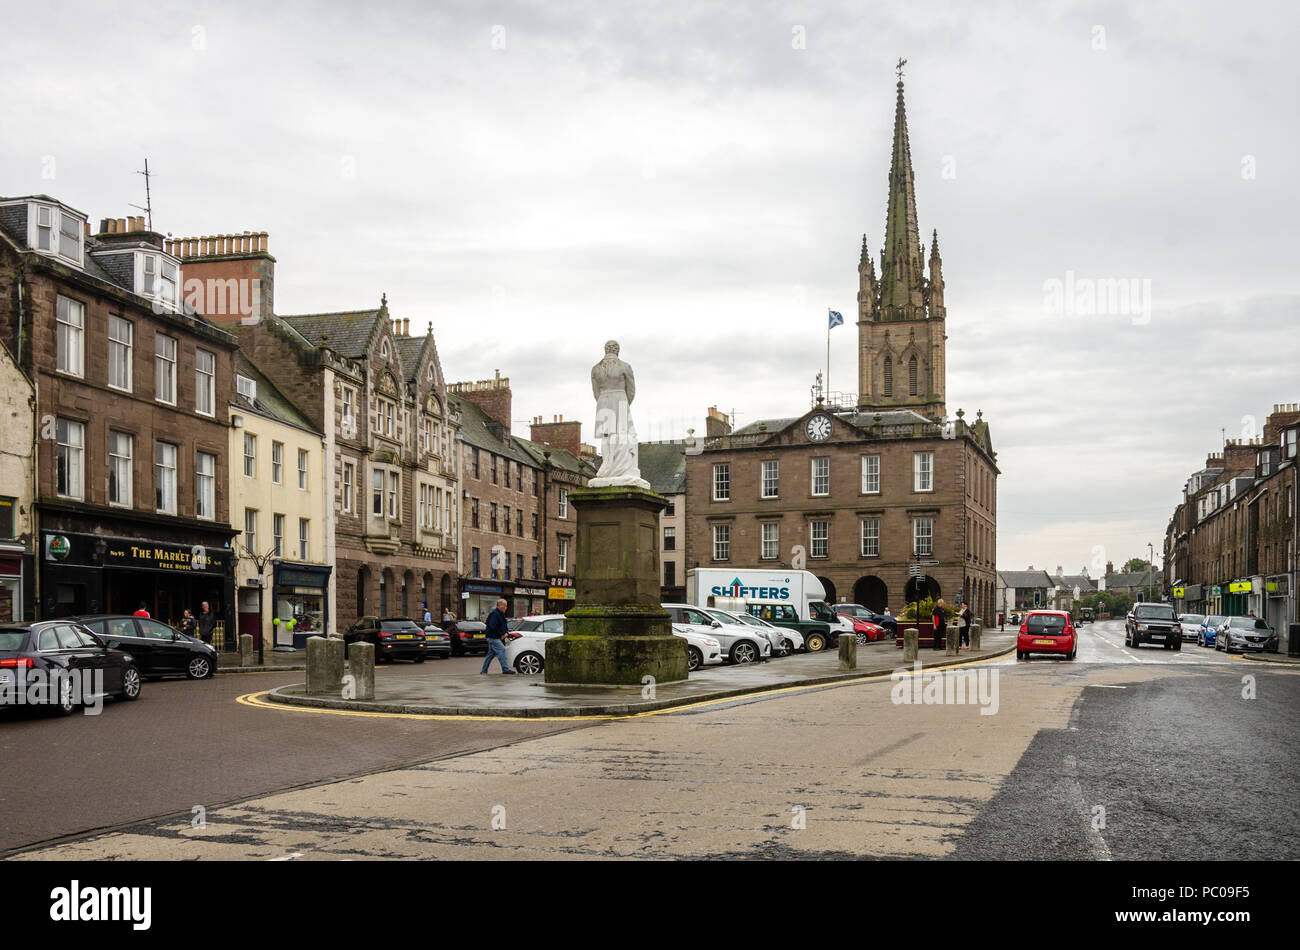 A view of the High Street in Montrose, Scotland looking towards Old and St Andrews Church and the monument to Joseph Hume. Stock Photo